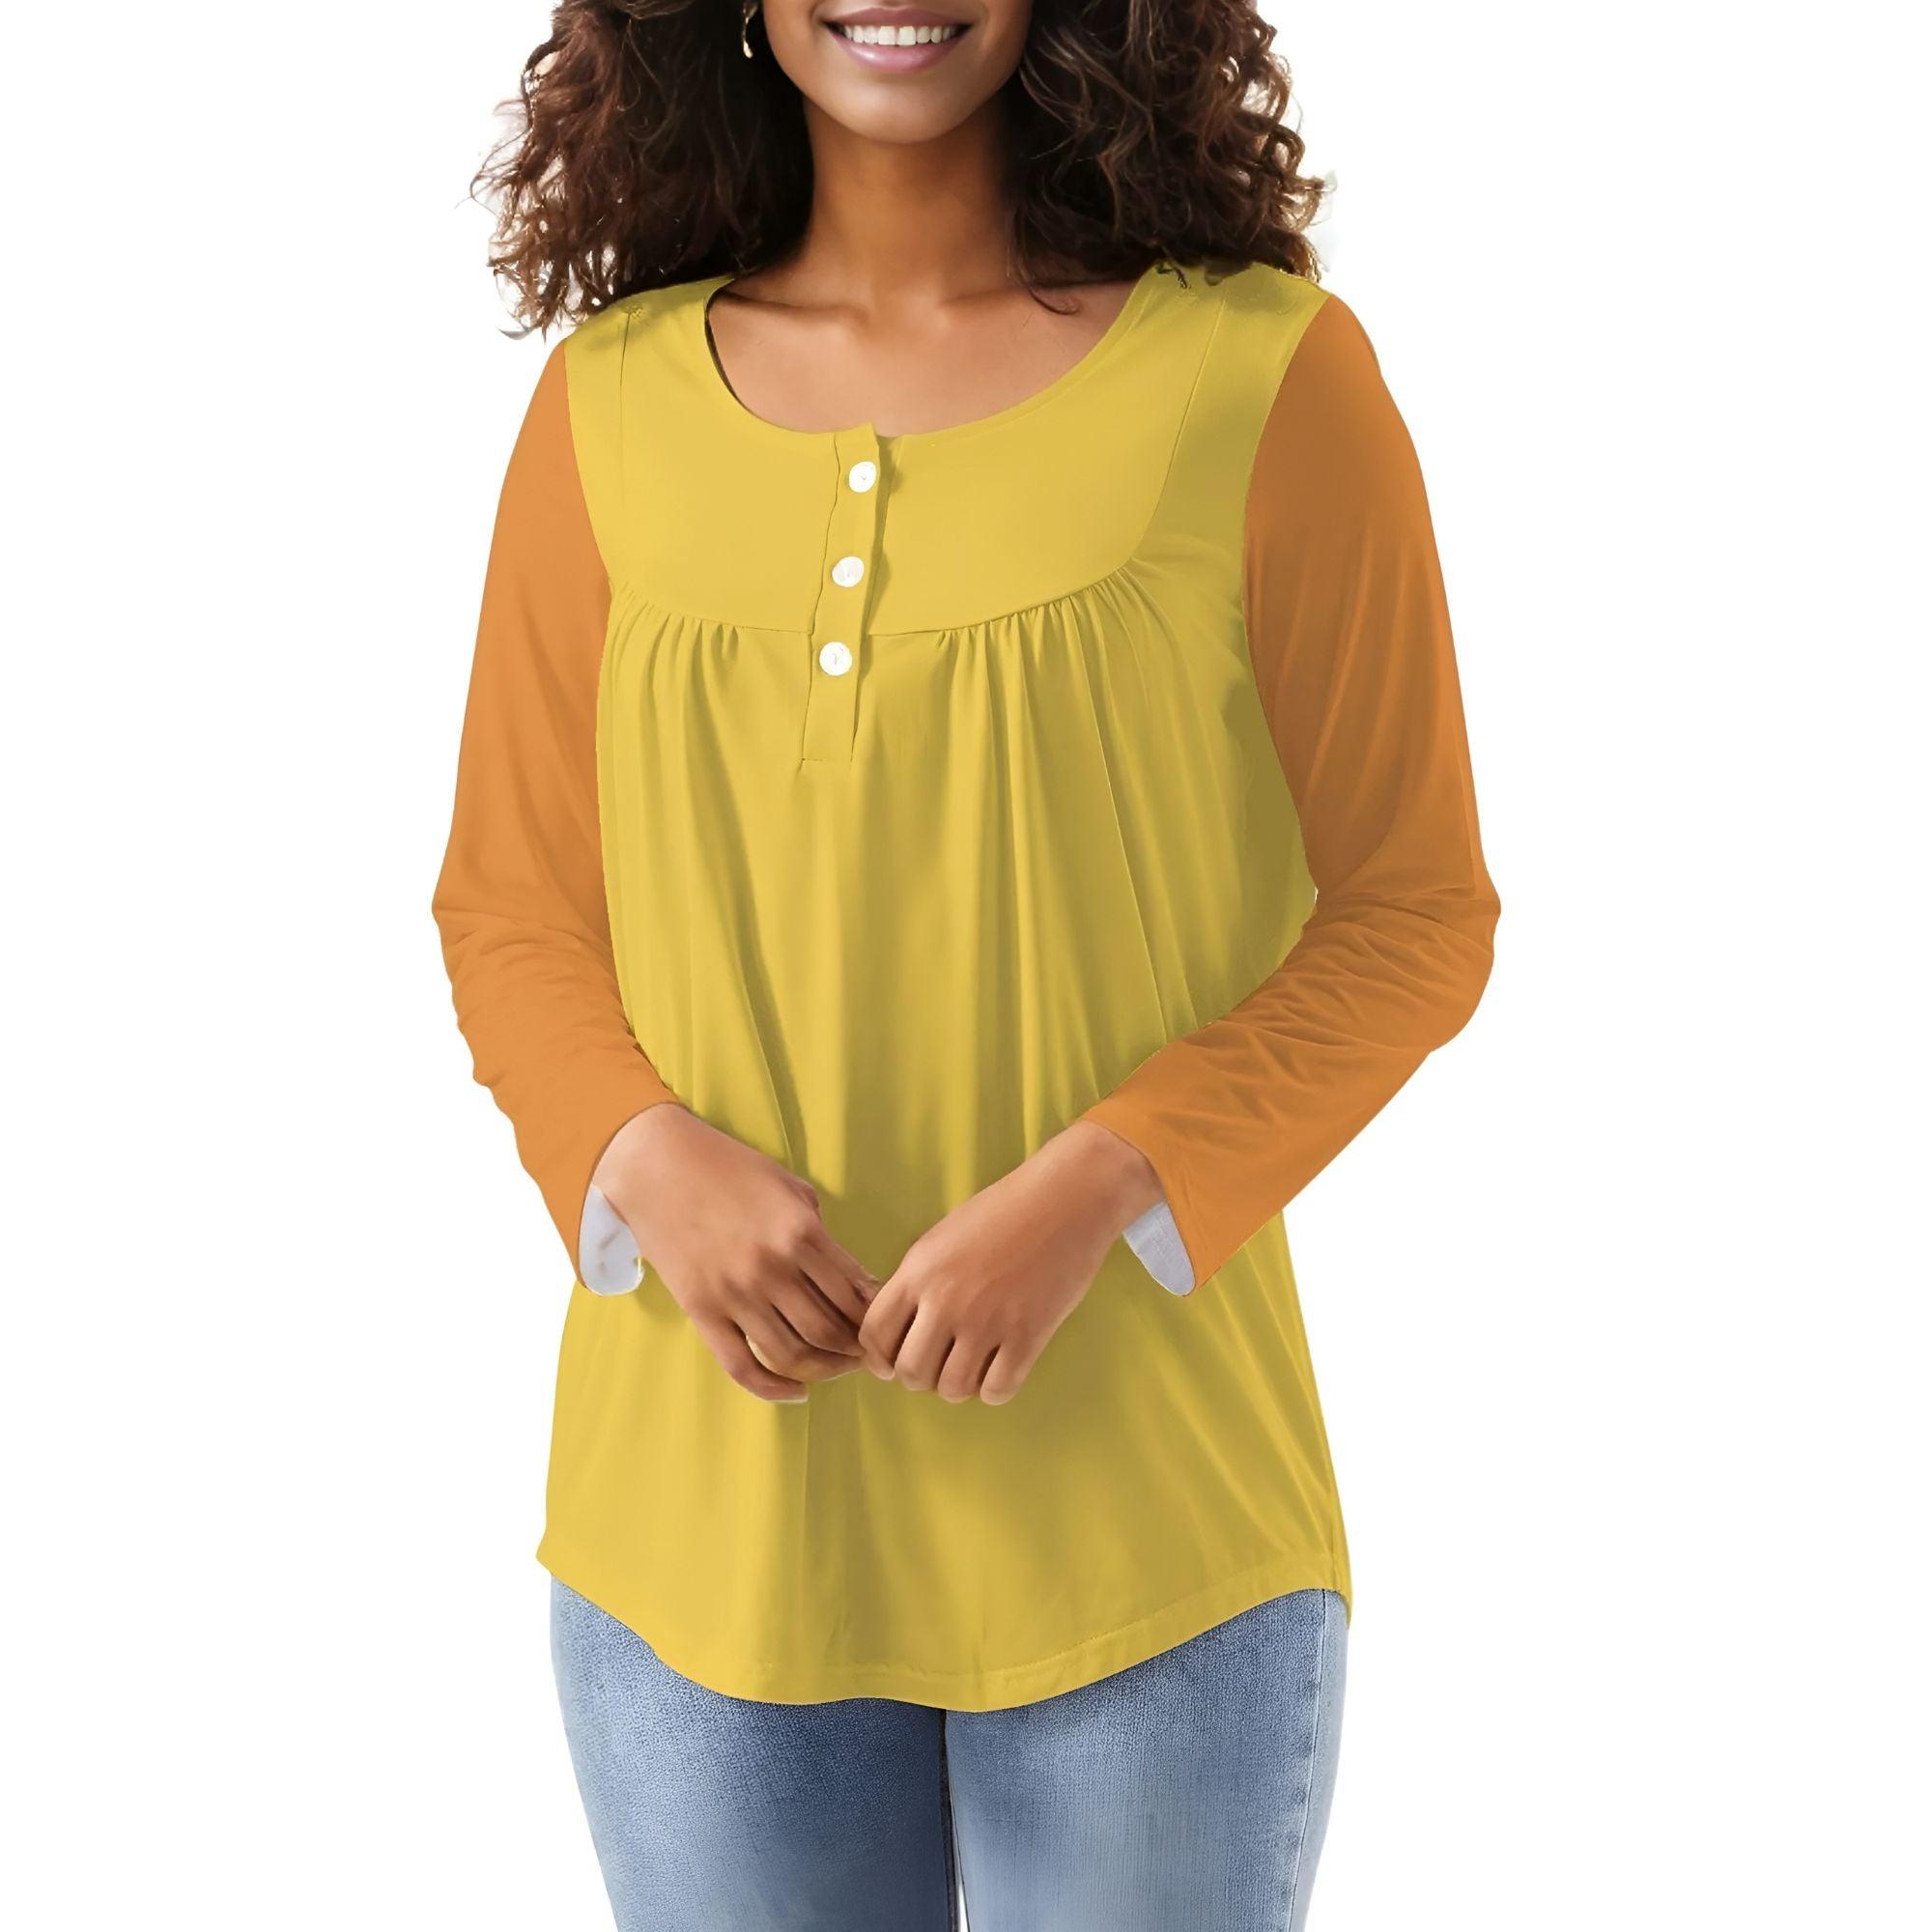 Pinsa Yellow Orange Babydoll Long Sleeve Crew Neck Top - Color Block Relaxed Bold Solid Vibrant Blouse Women's